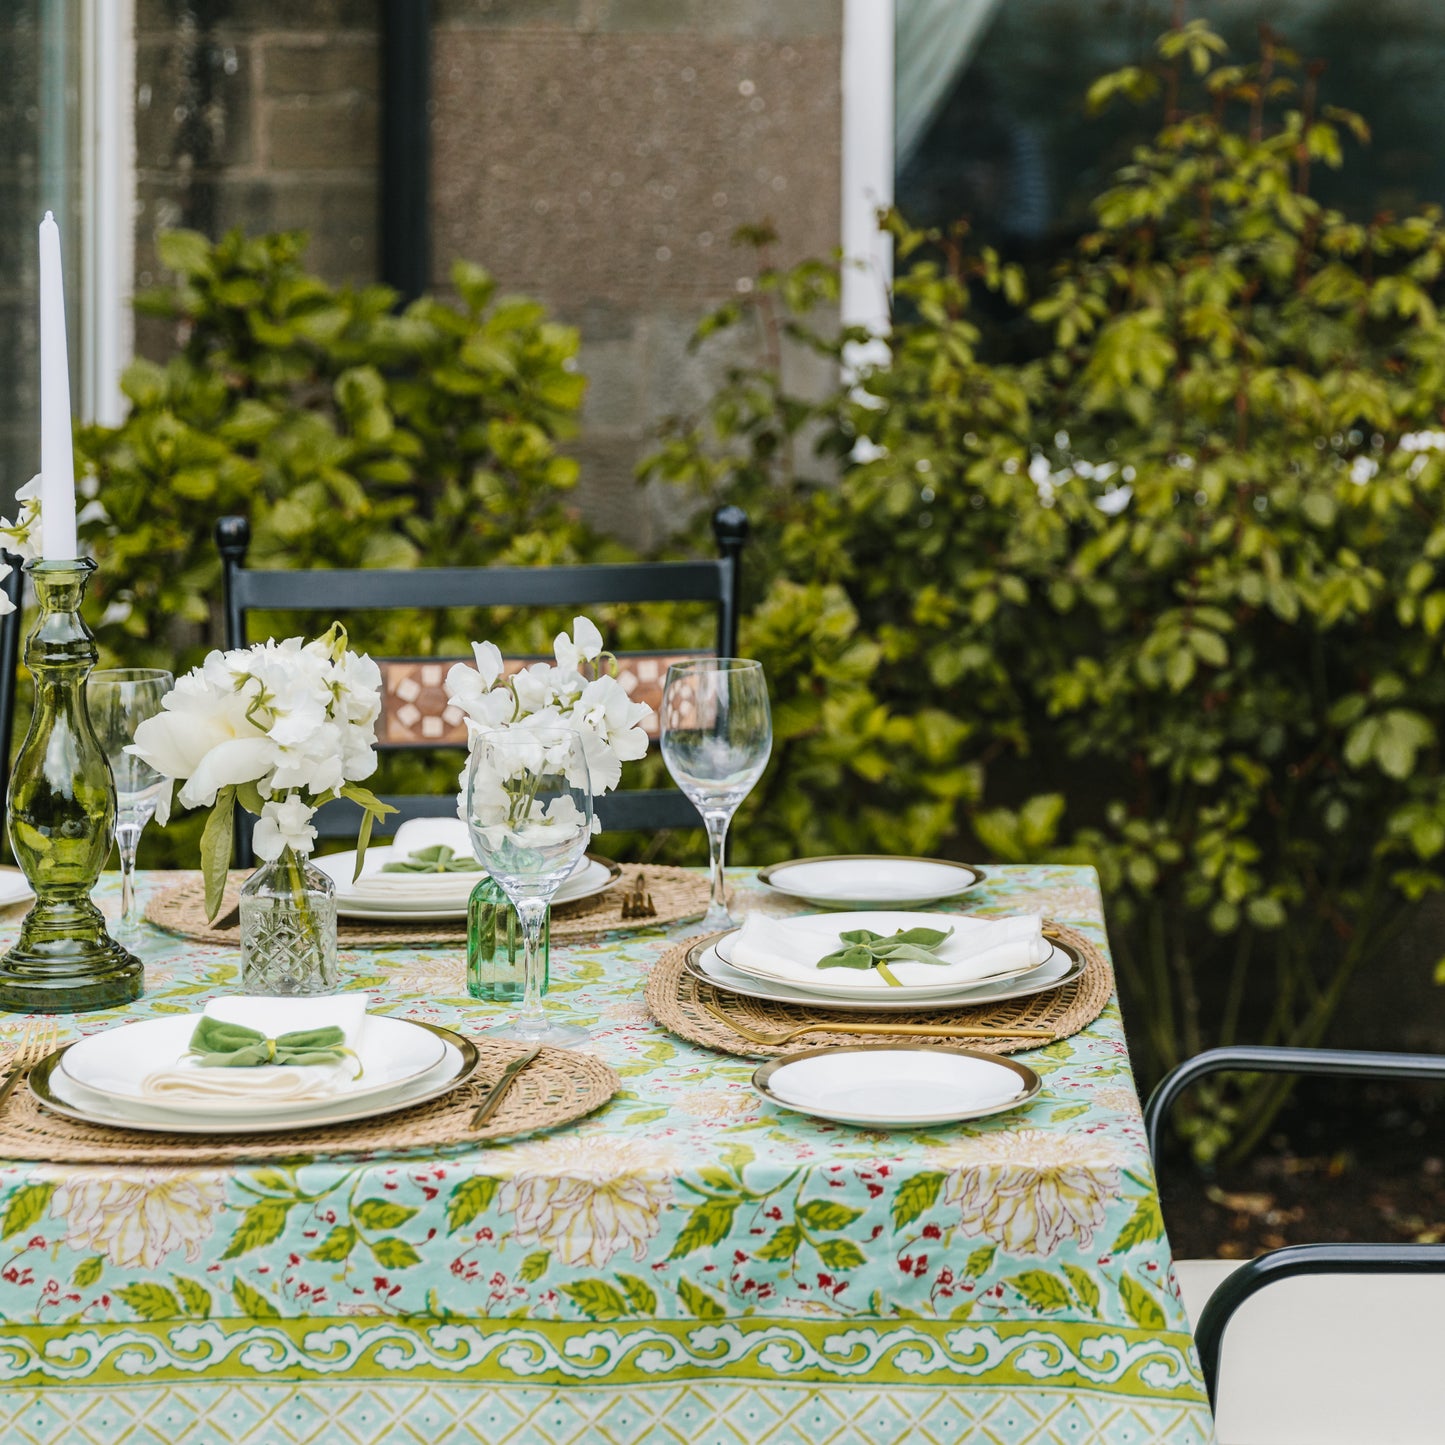 View of Mint & Moss tablecloth set outdoors with seagrass placemats, clear cut glass bud bottles, pale green bud bottles and large green glass candlesticks